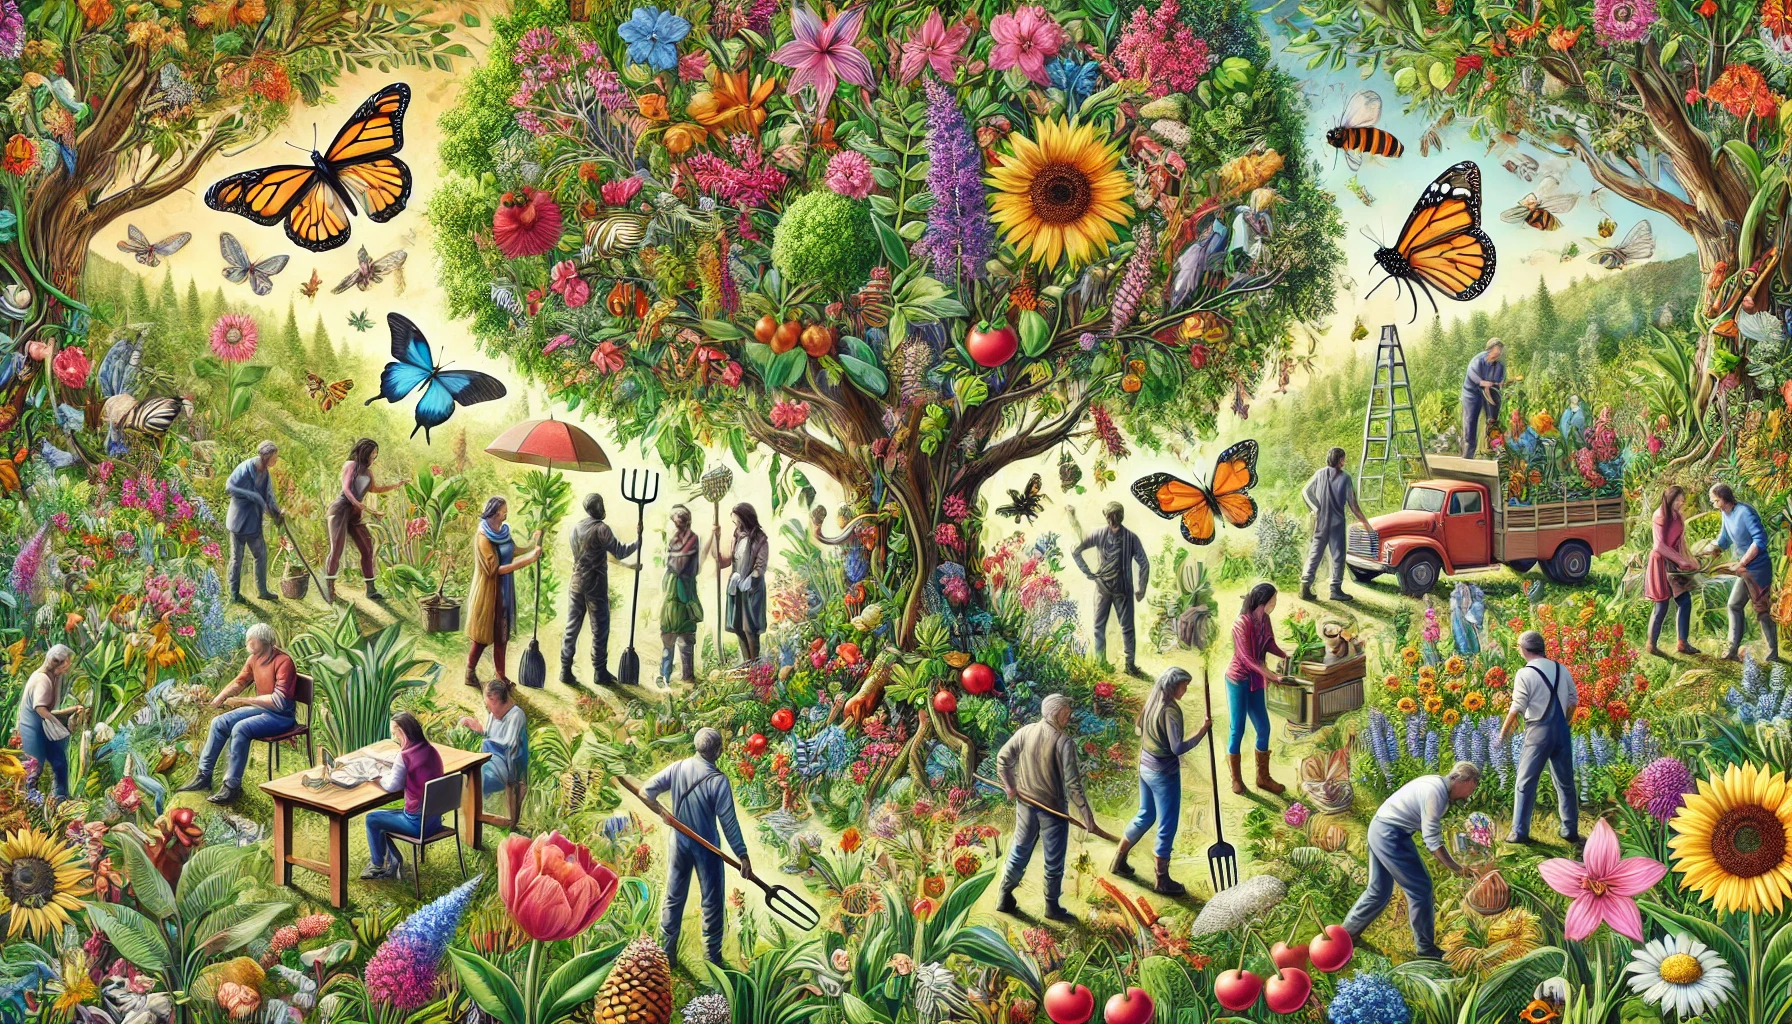 Picture showing a community of people caring for a thriving natural ecosystem.